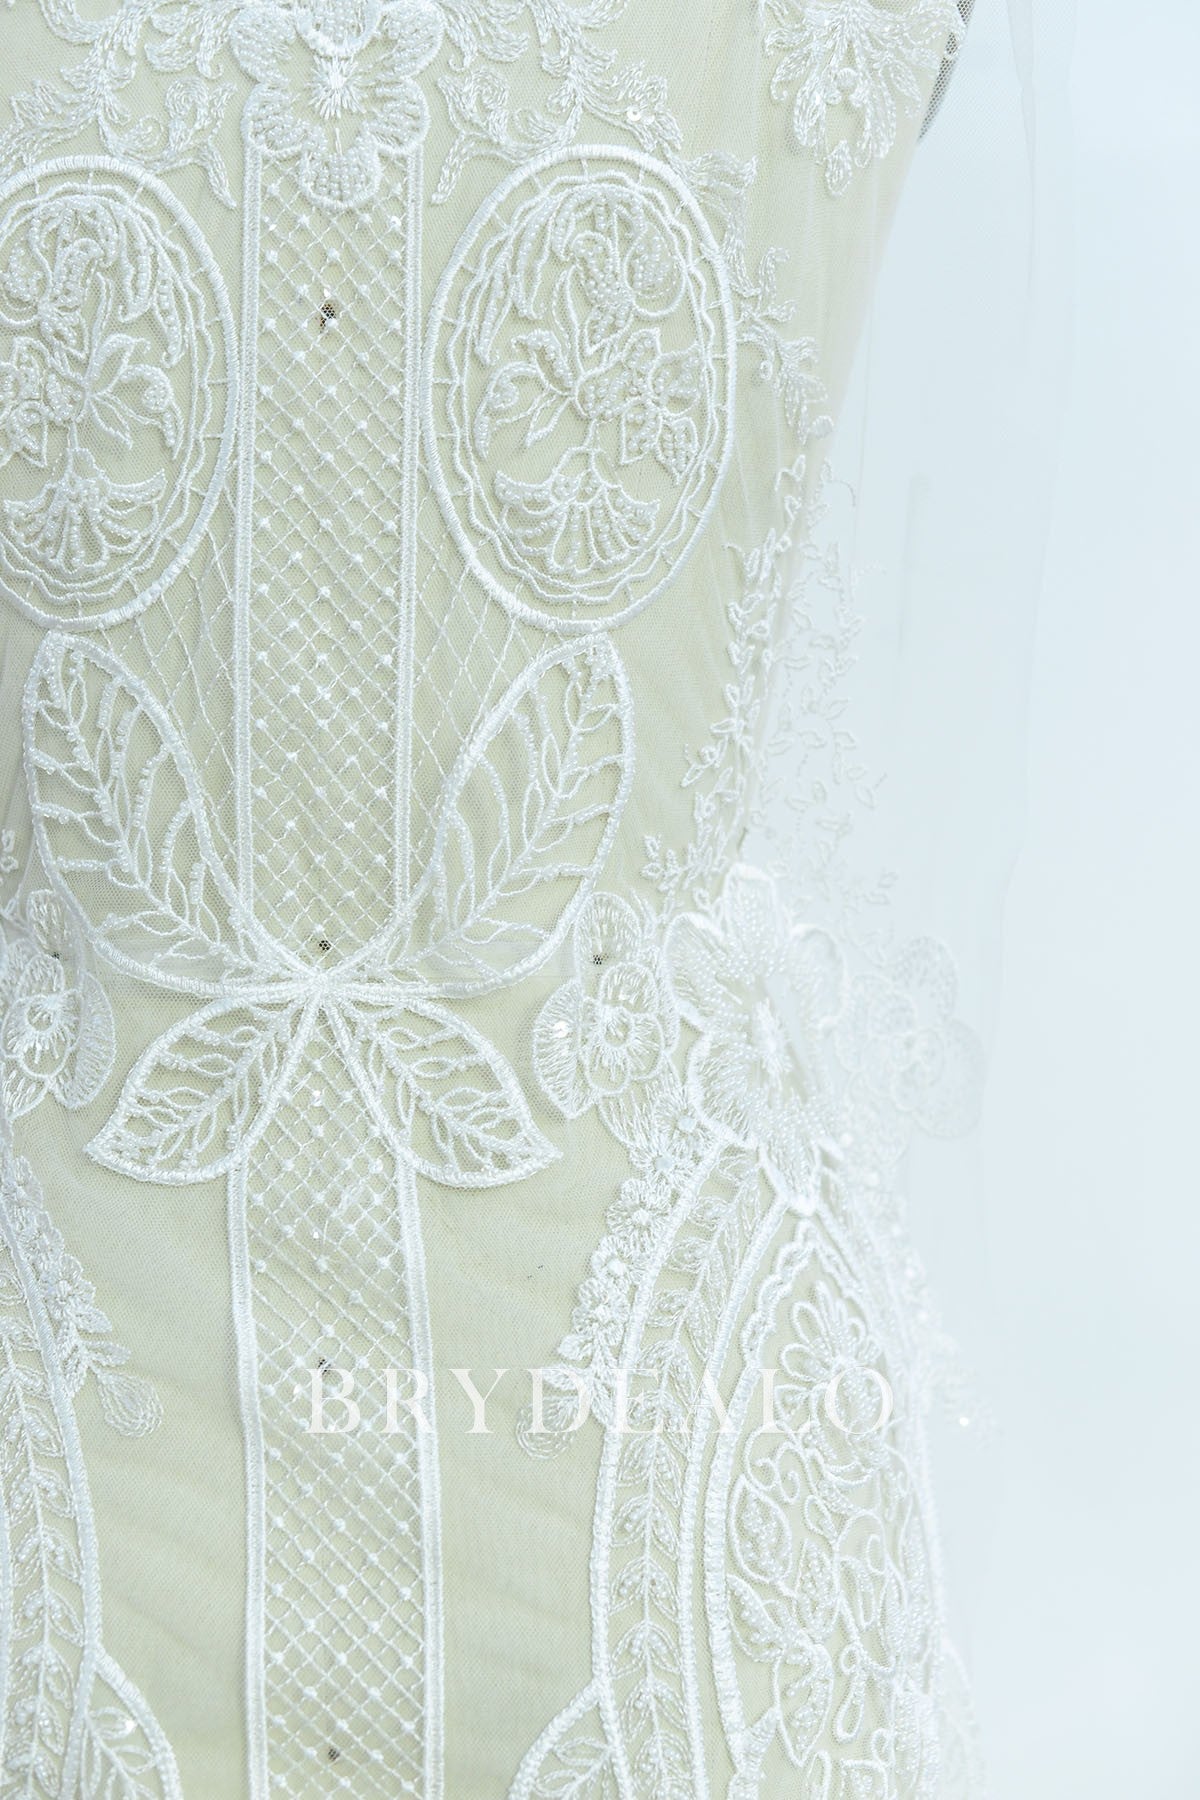 High-End Beaded Baroque Bridal Lace Fabric